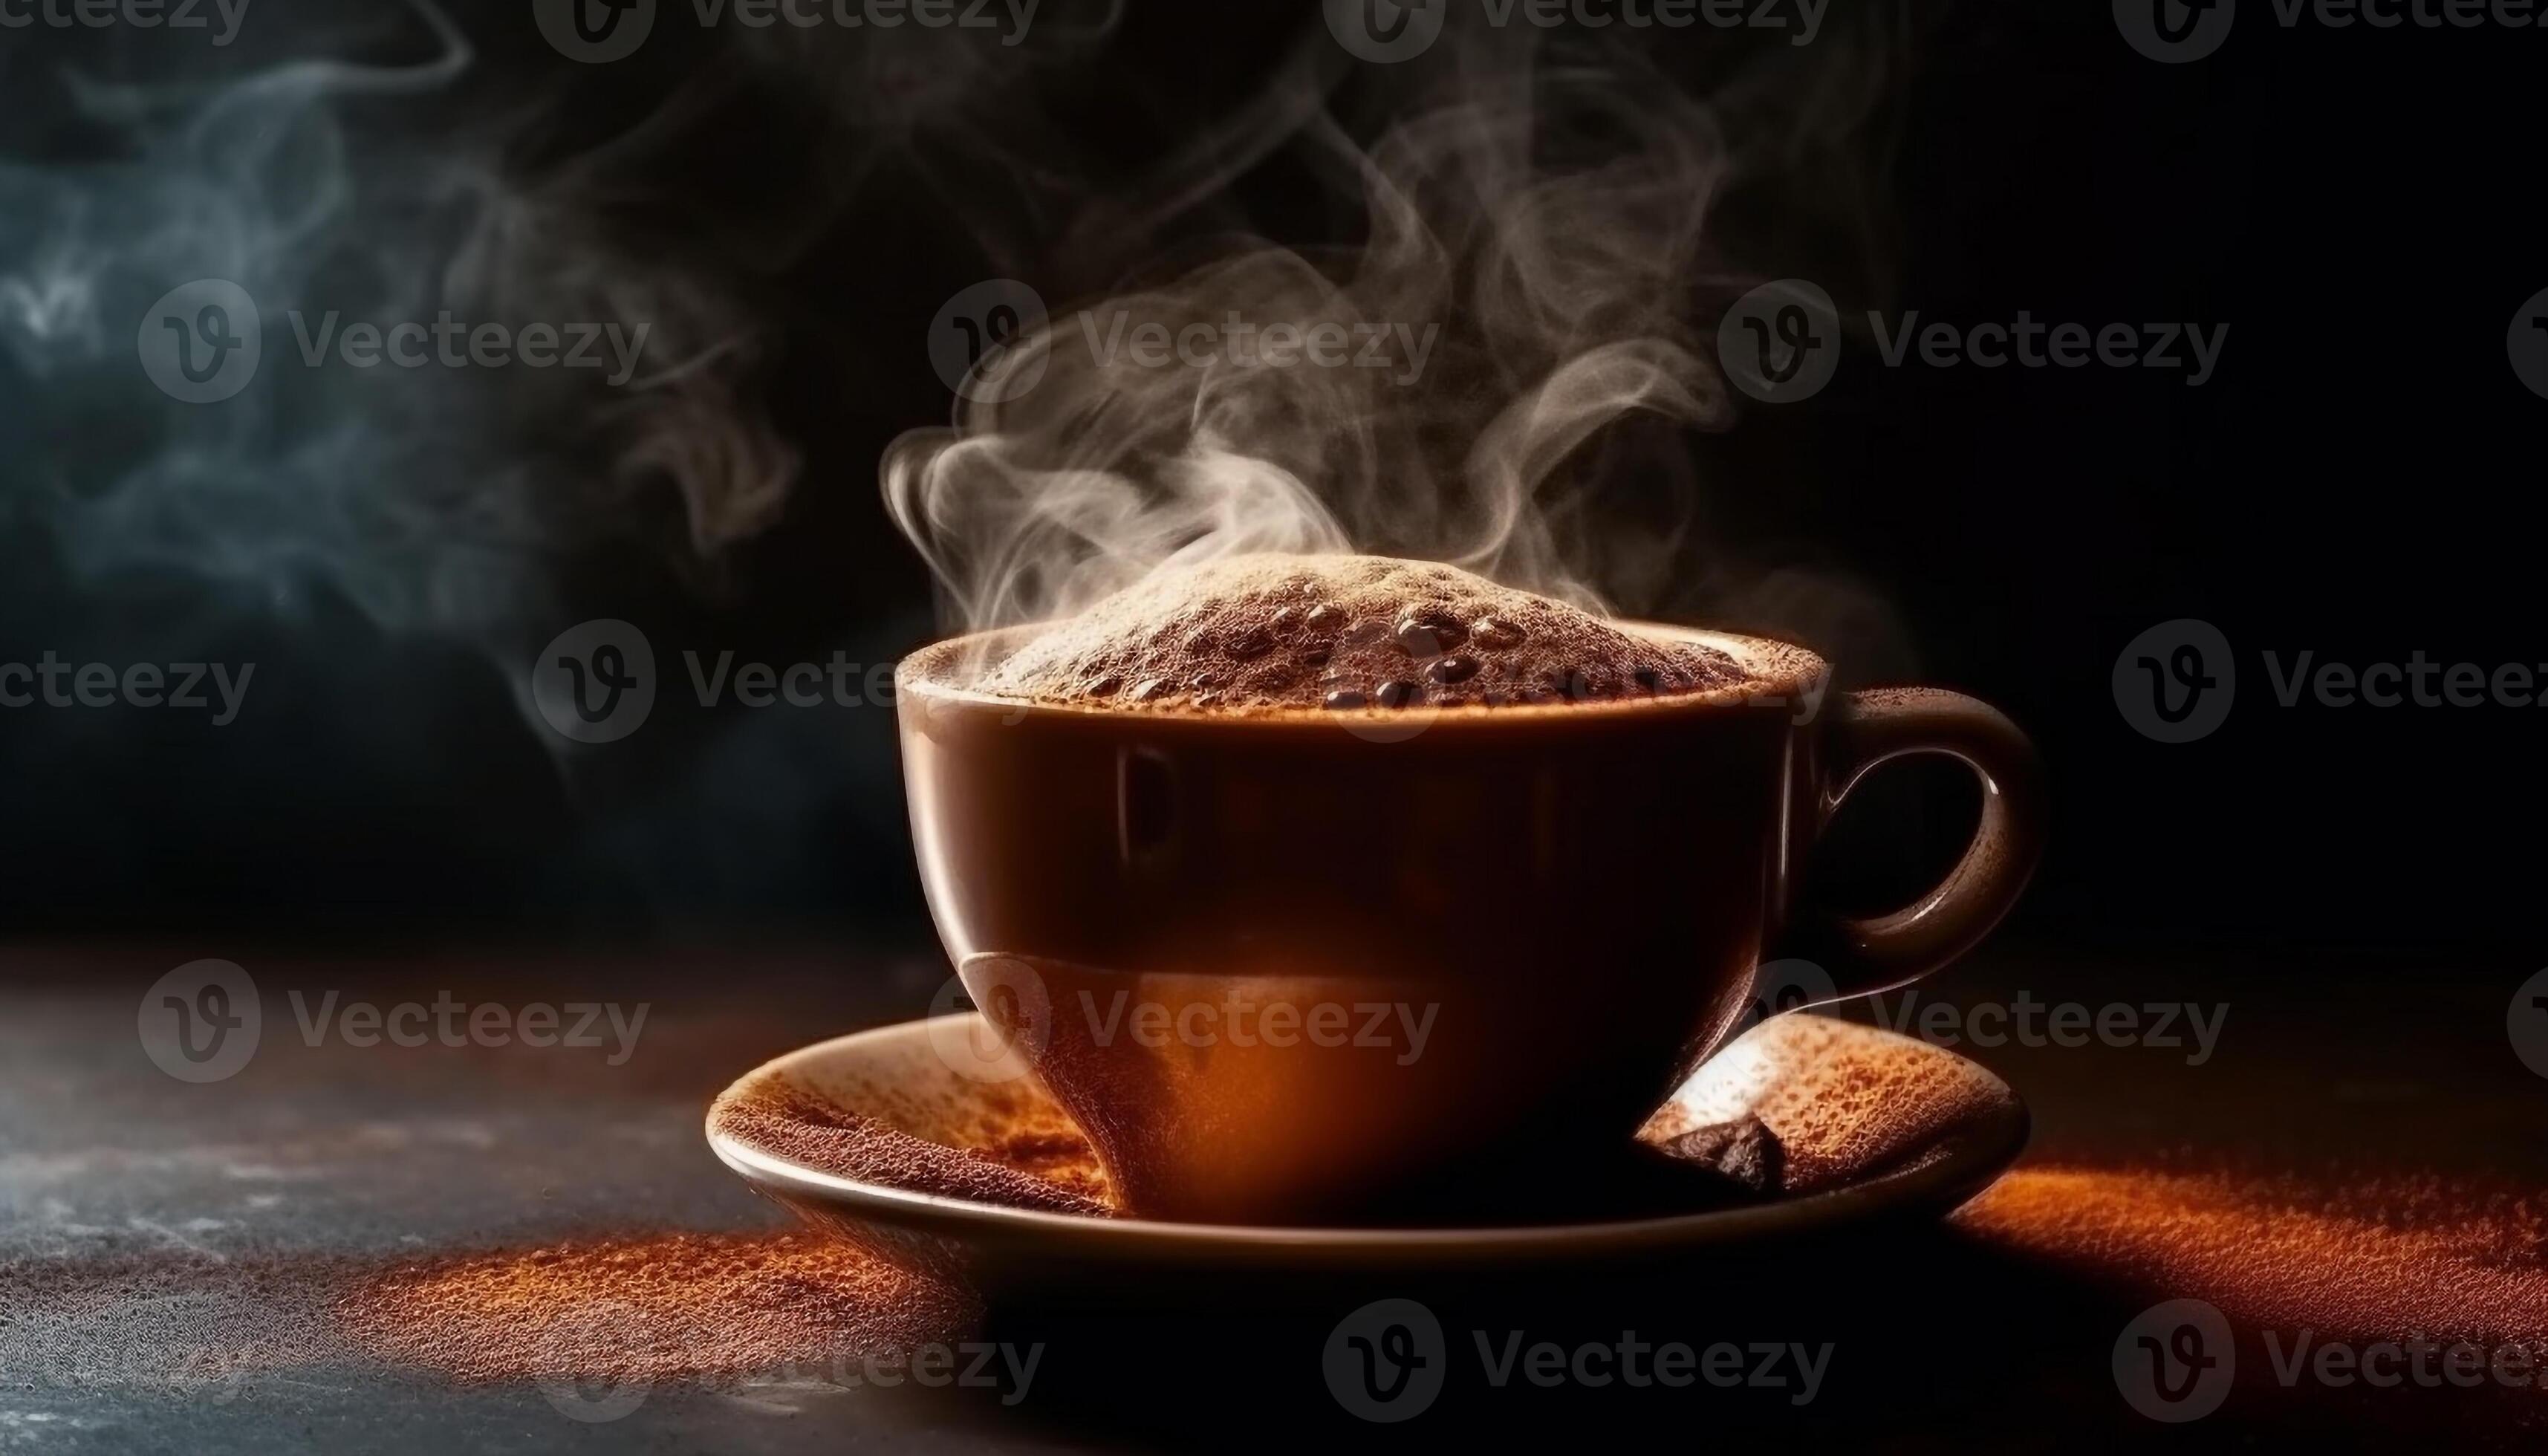 https://static.vecteezy.com/system/resources/previews/025/496/489/large_2x/hot-steam-rises-from-rustic-coffee-mug-on-wooden-table-generated-by-ai-photo.jpg